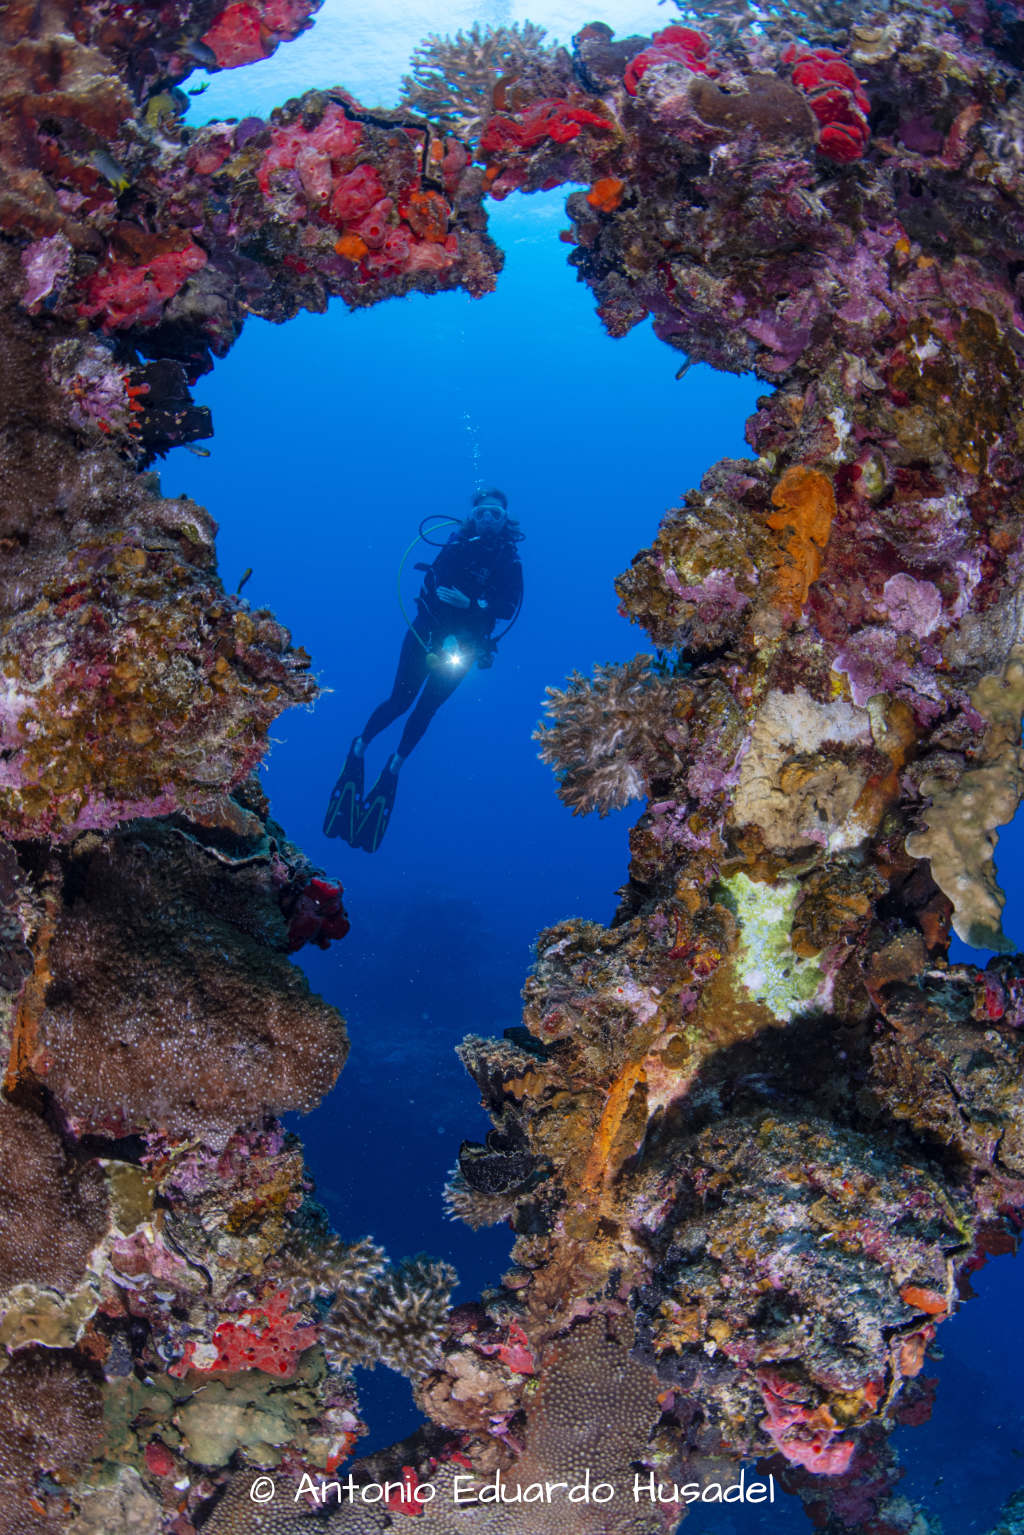 Diver at the wreck of the Iro in Palau